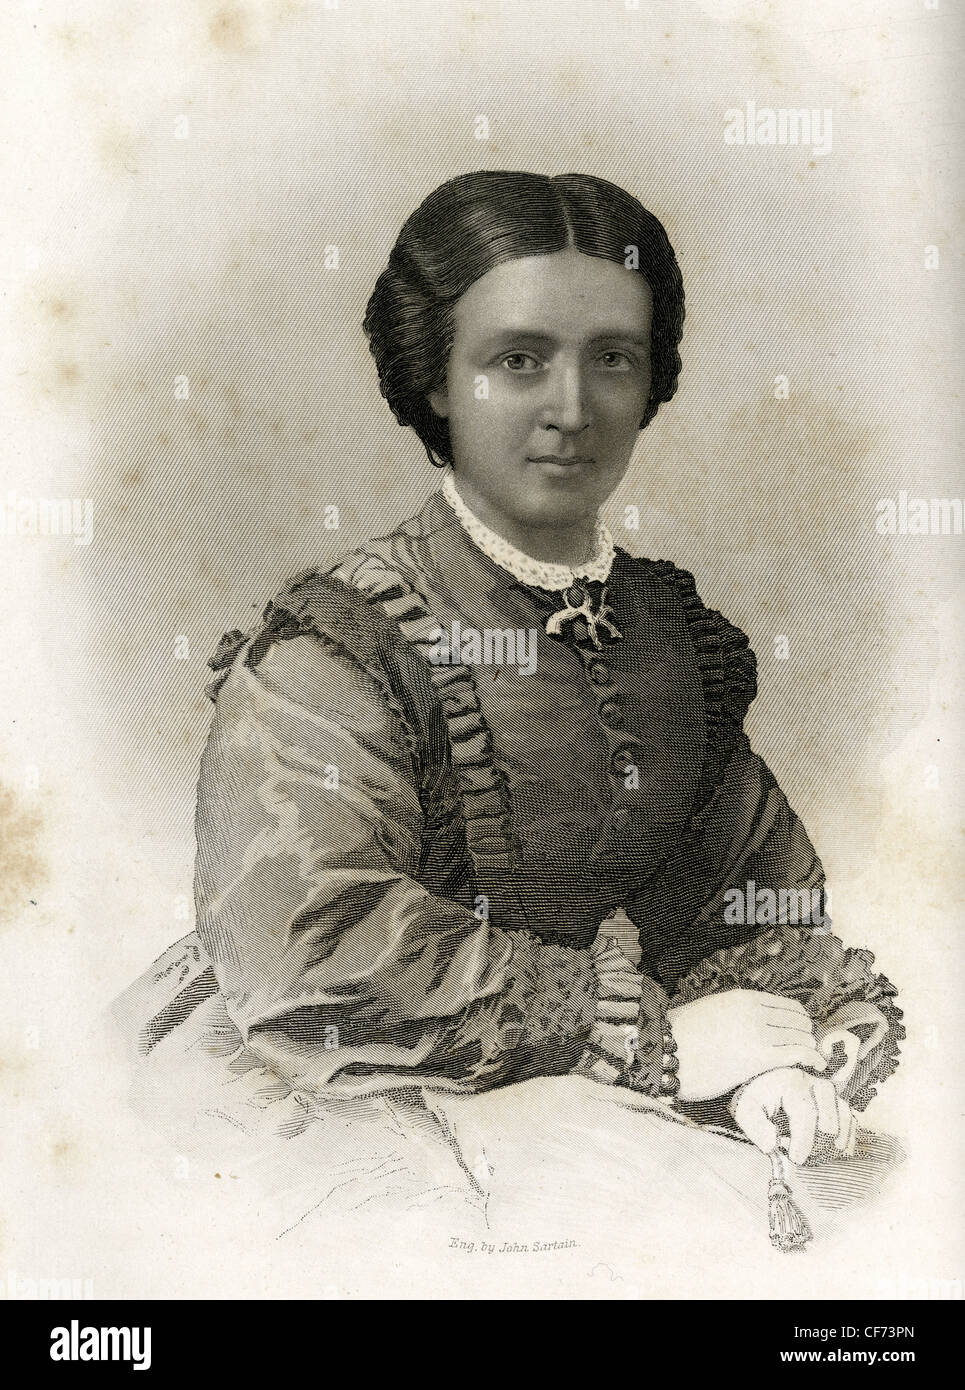 1867 engraving of Mary Jane Safford-Blake. Stock Photo